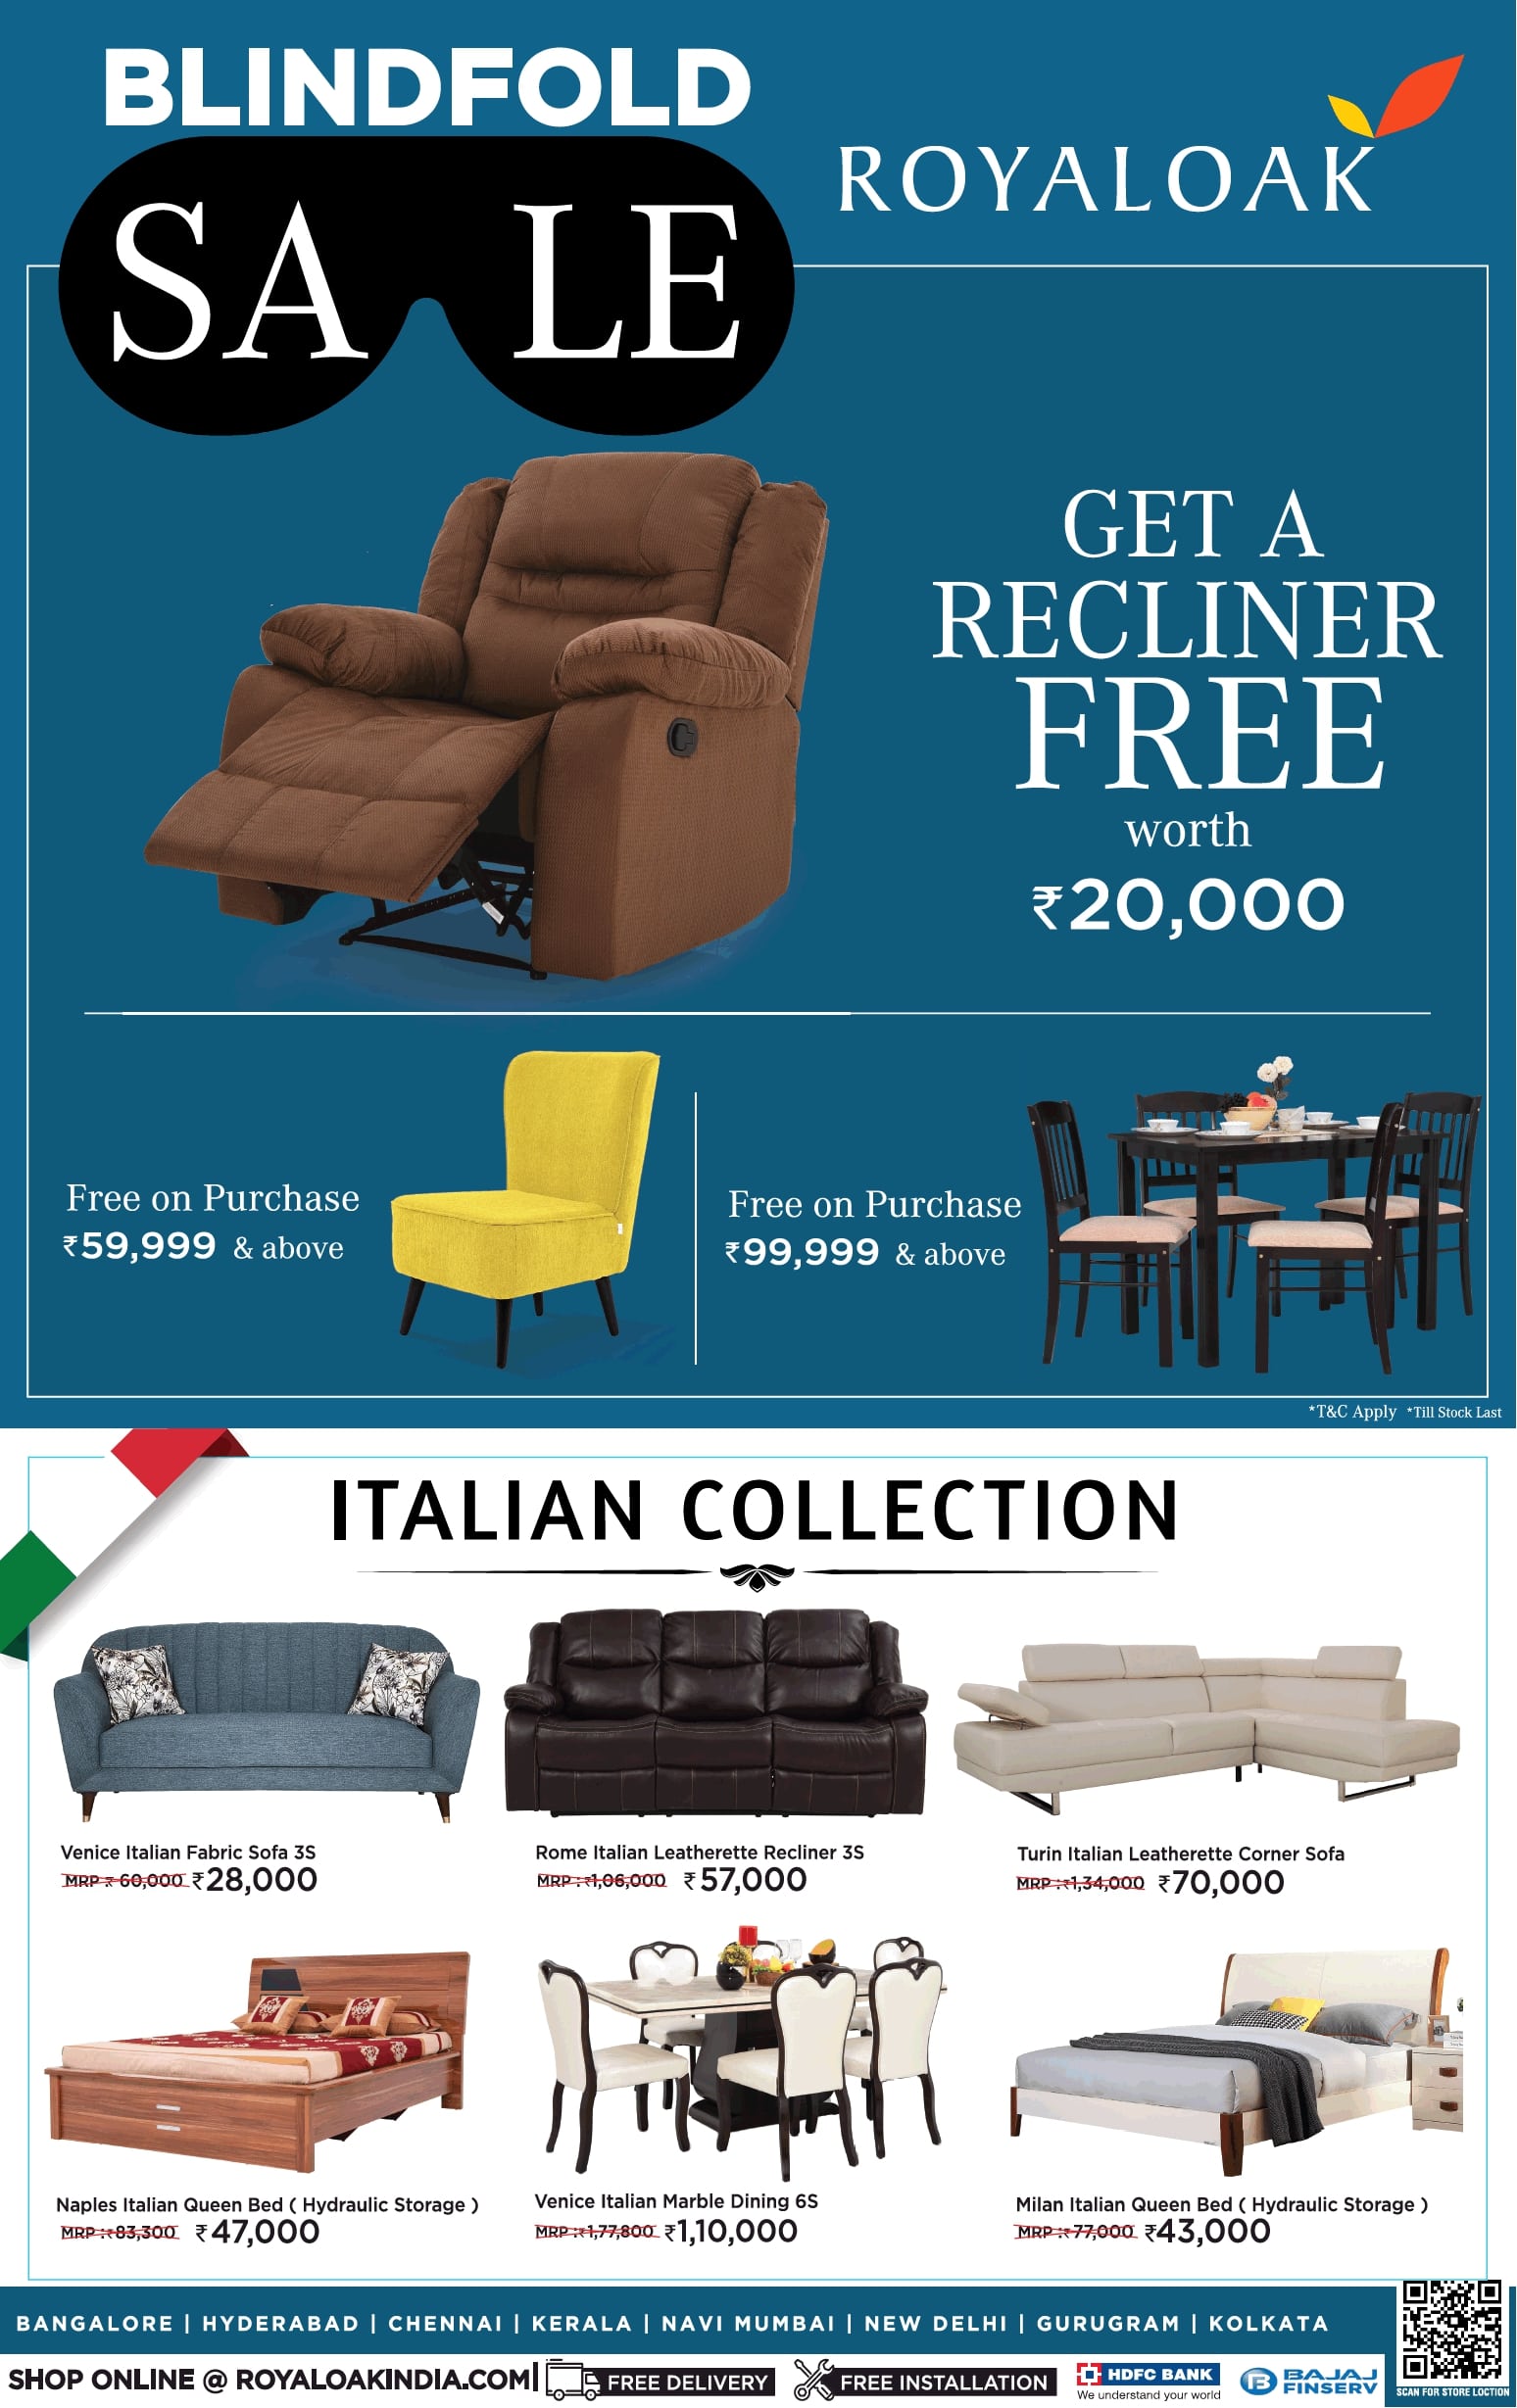 royaloak-blind-fold-sale-get-a-recliner-free-worth-rupees-20000-ad-bangalore-times-13-01-2021